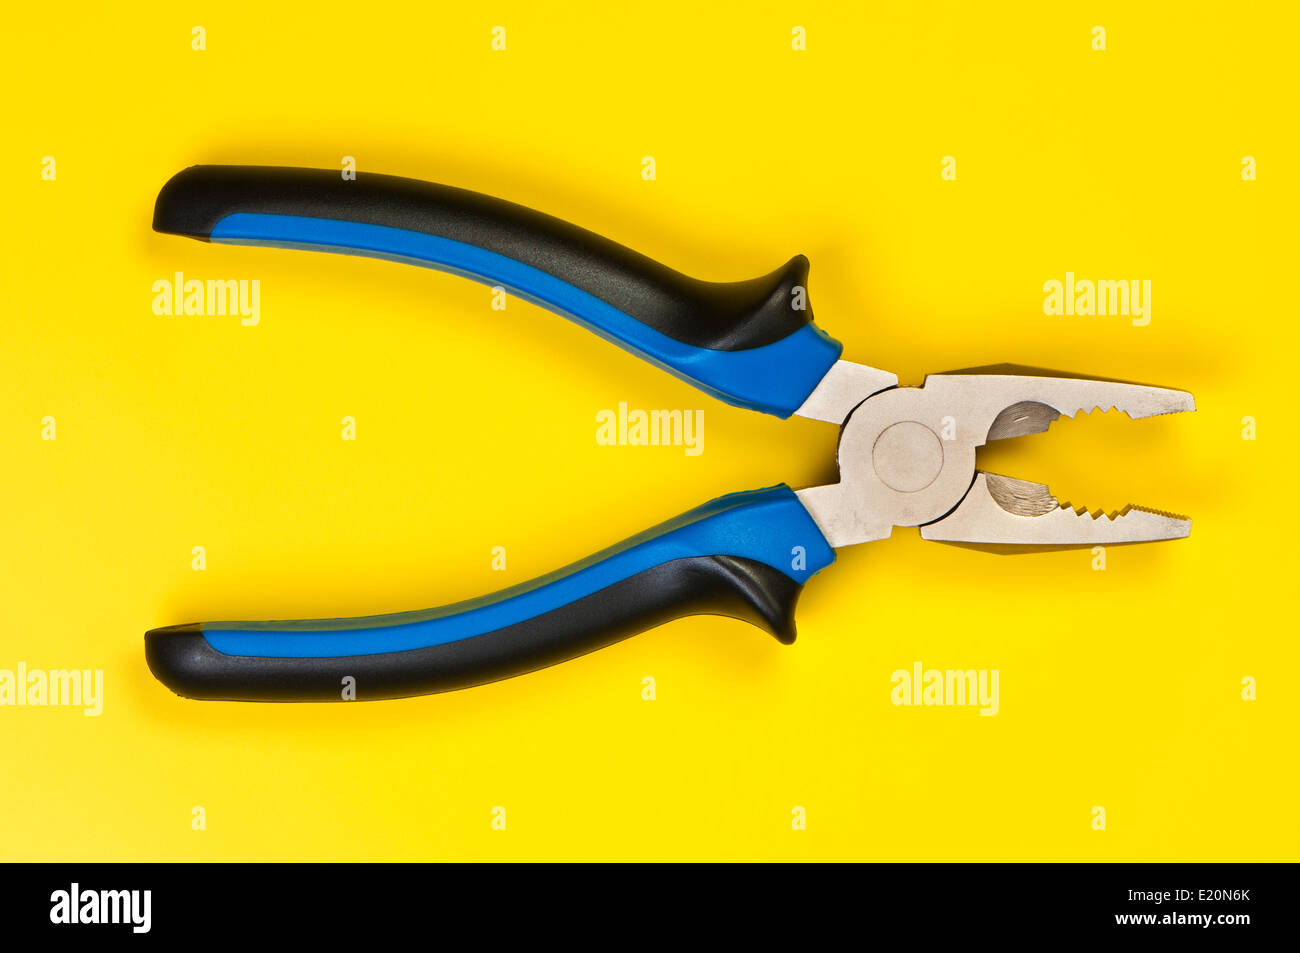 Pliers on a yellow background. Stock Photo